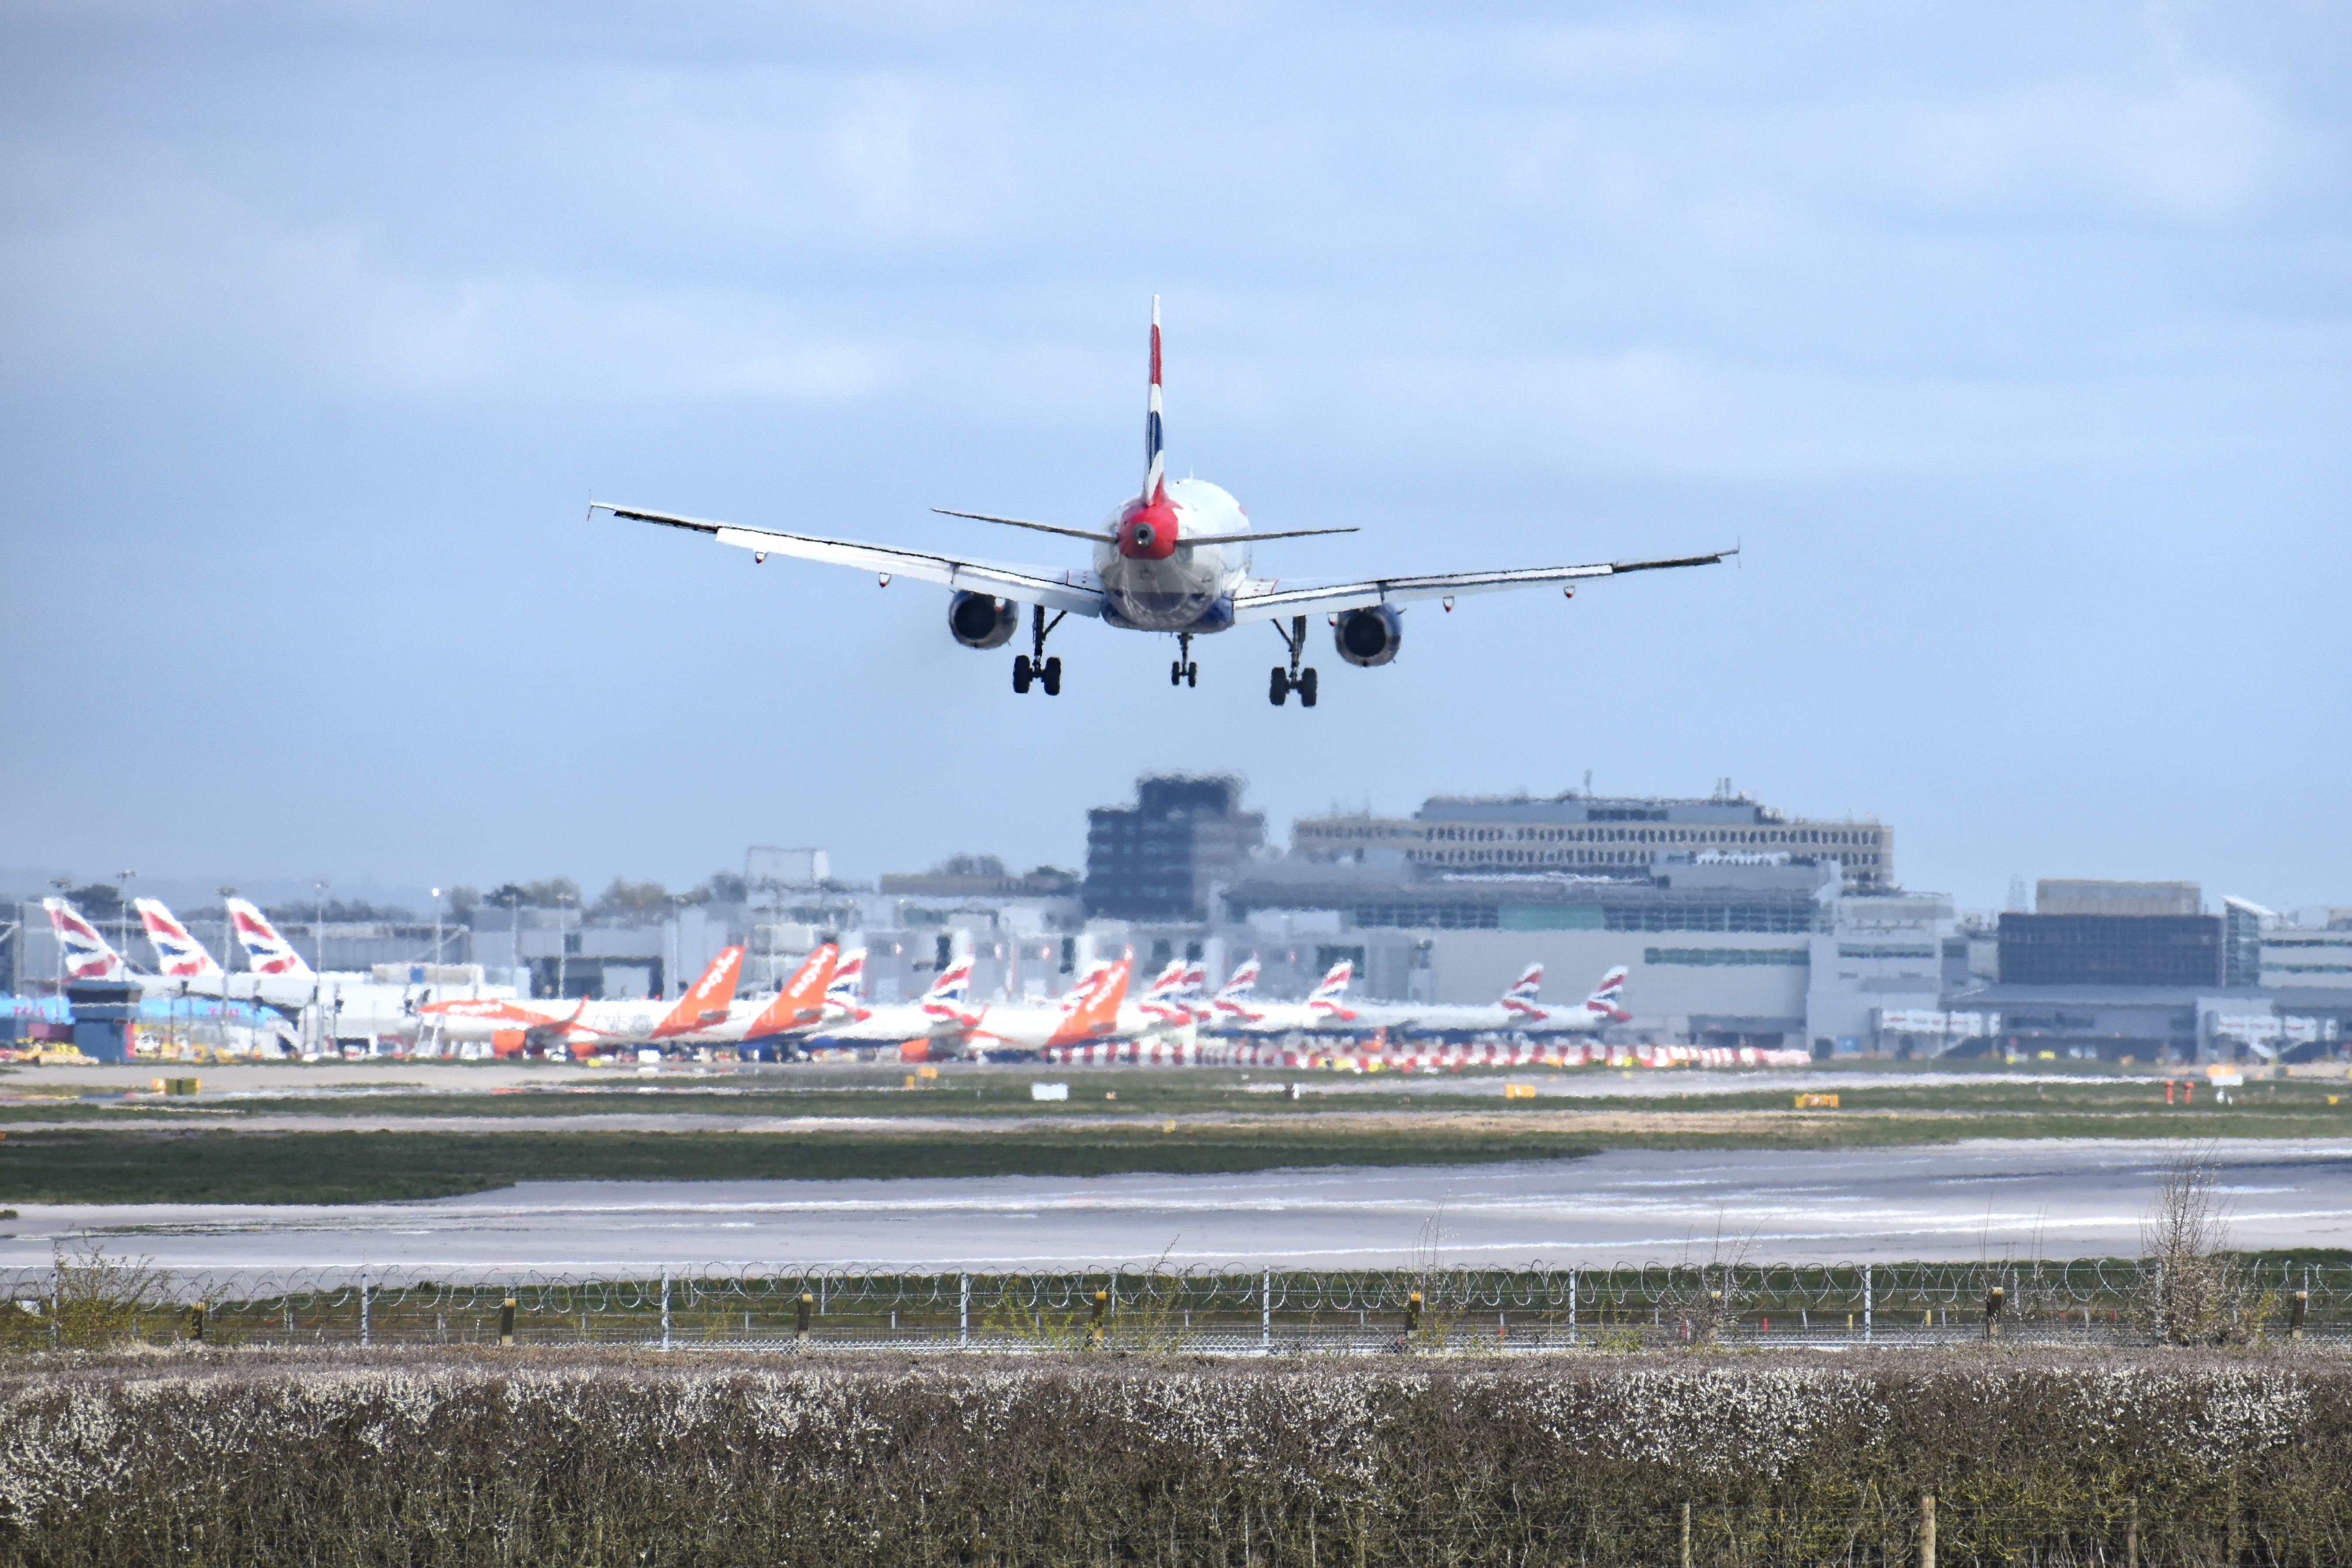 A British Airways Airbus A319-131 comes into land at Gatwick Airport.